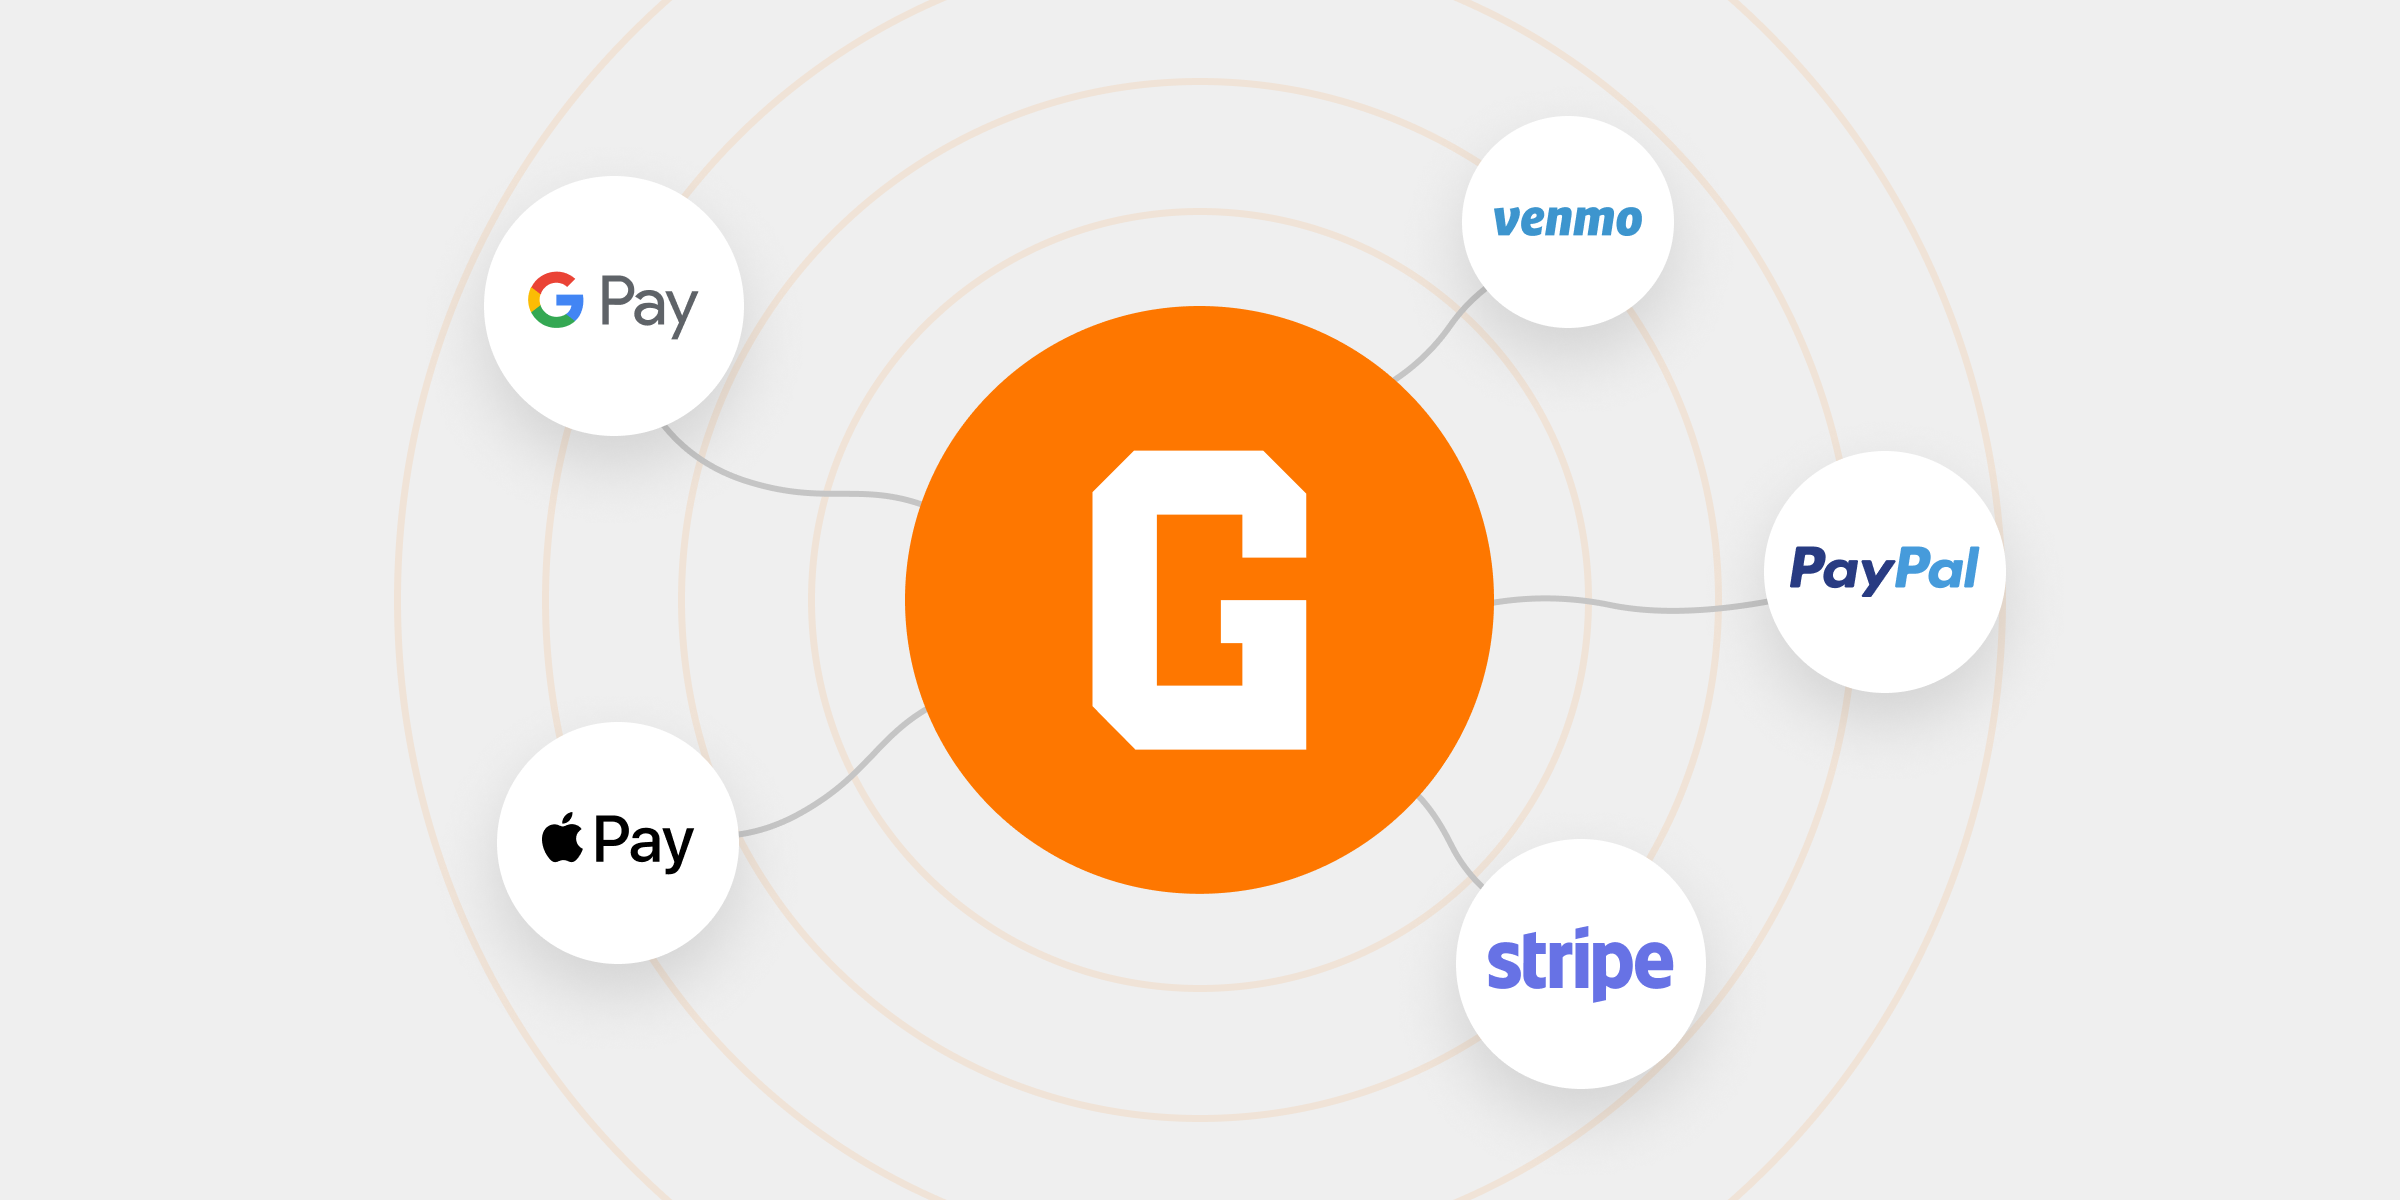 GiveCampus logo surrounded by GooglePay, ApplePay, Stripe, Venmo, and PayPal logos.